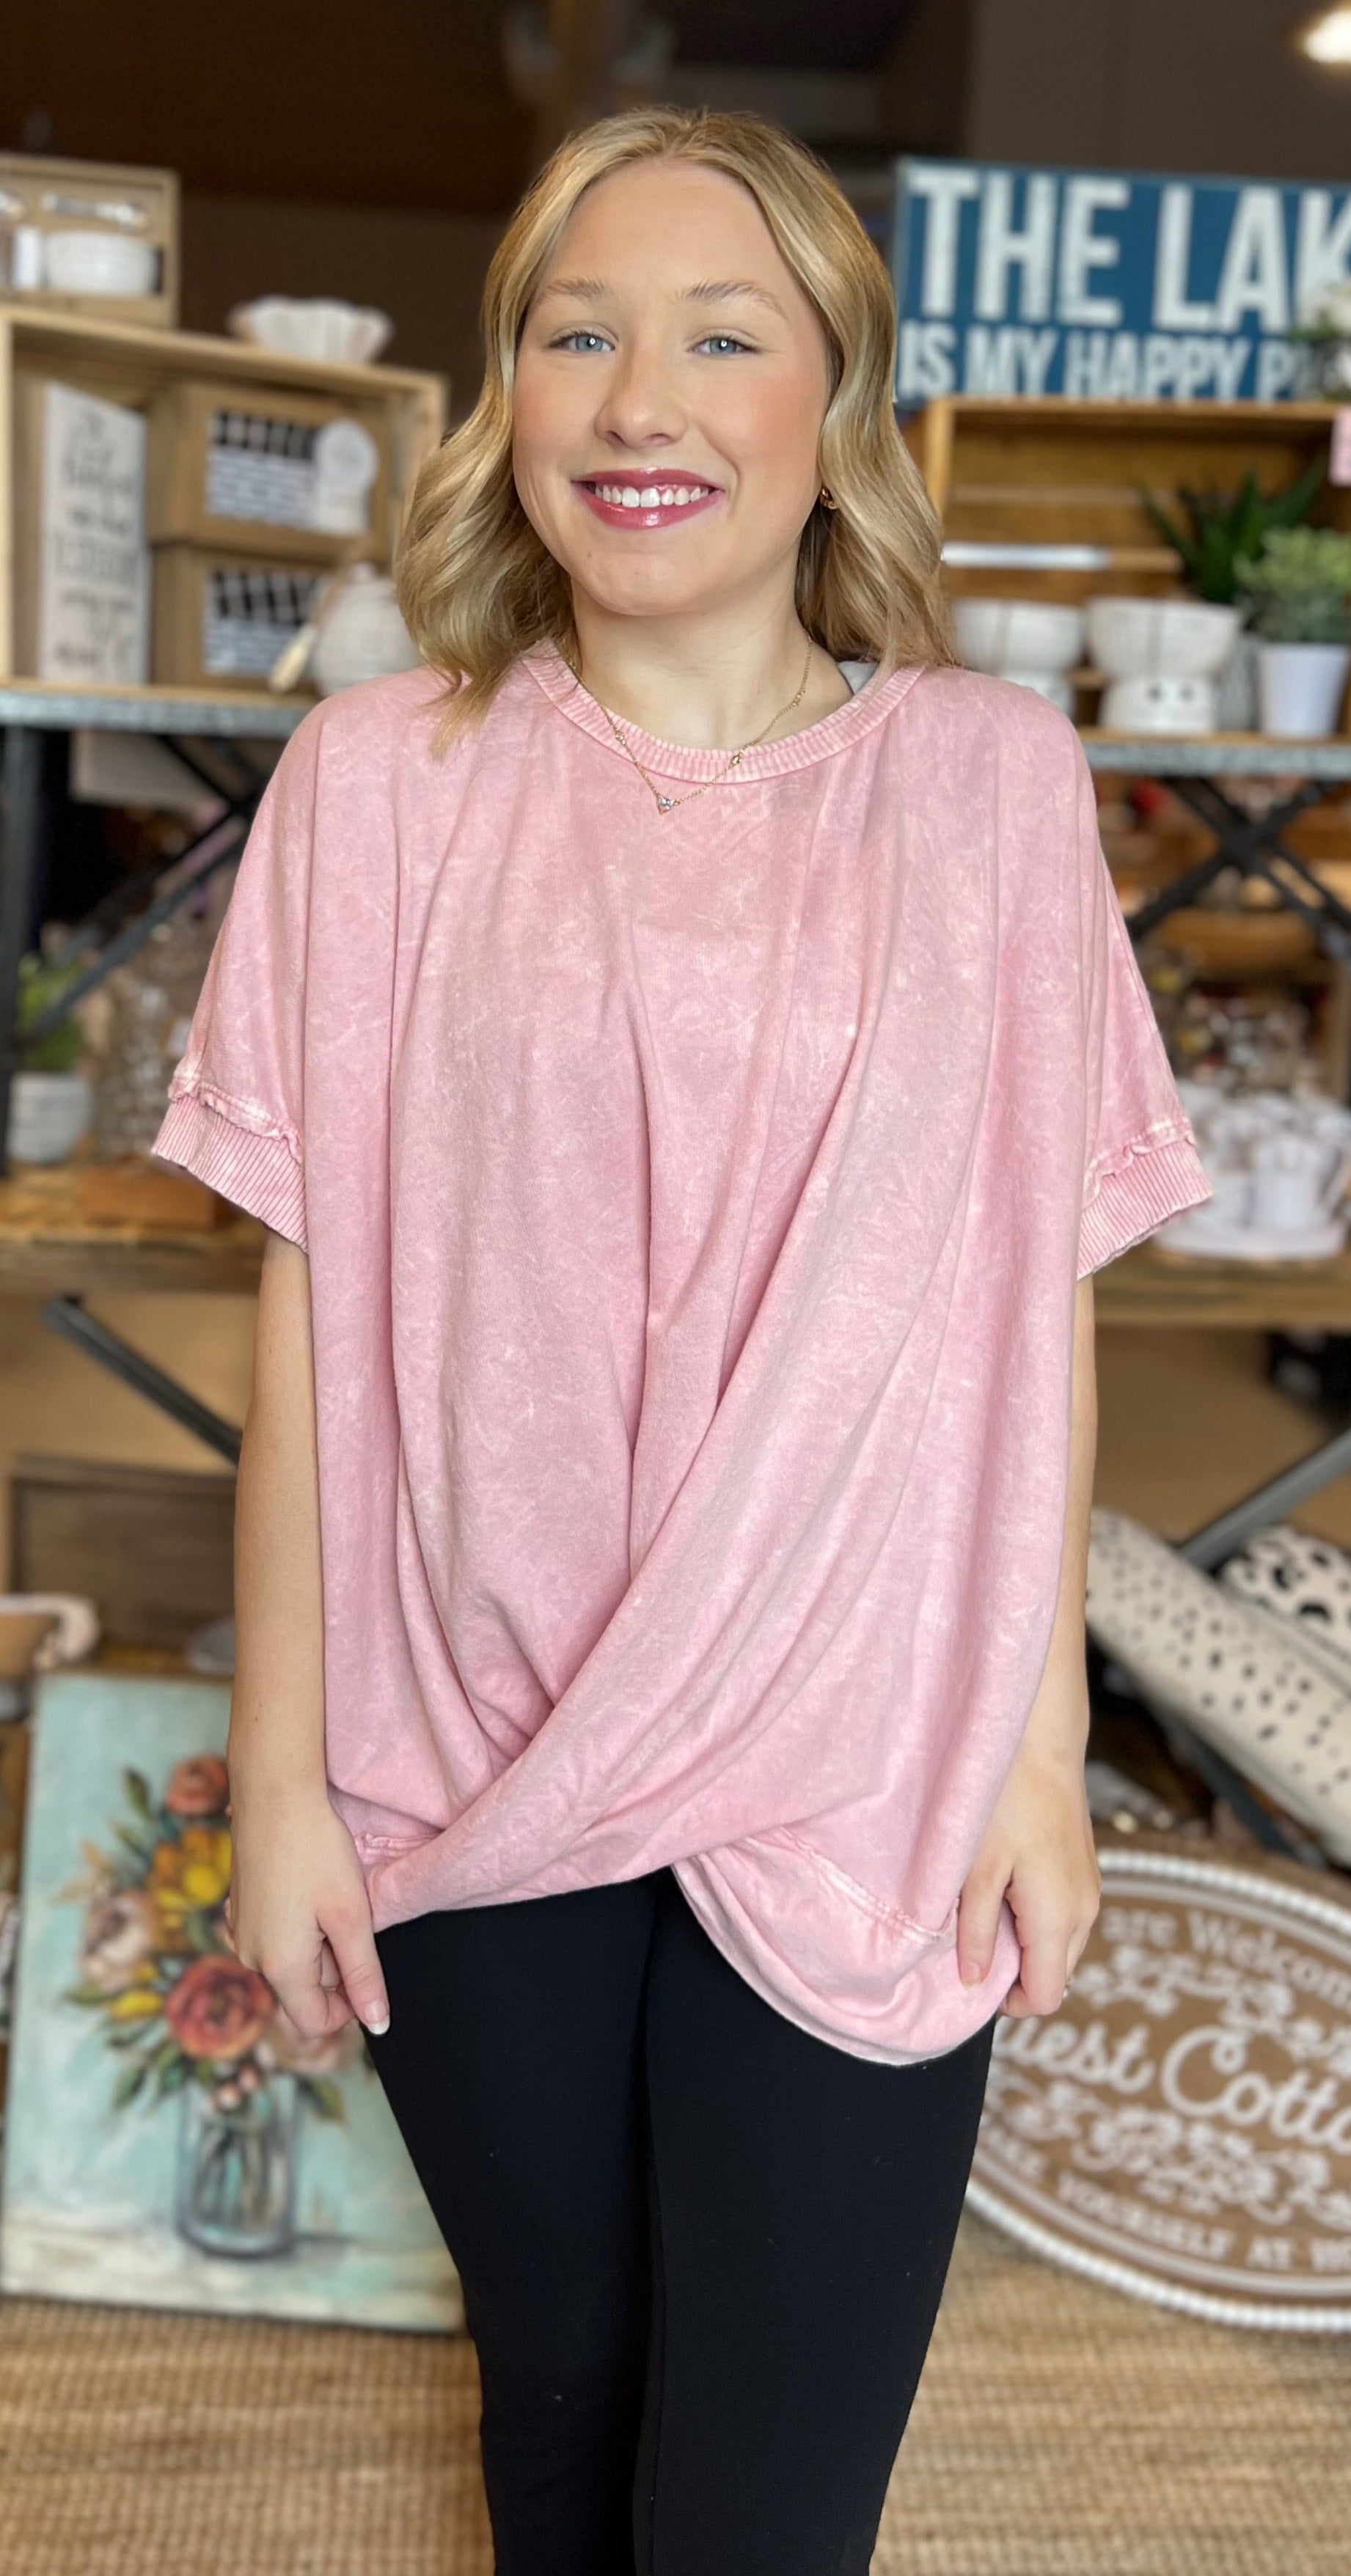 j.Her Twisted Sister Front Twist Top - Pink